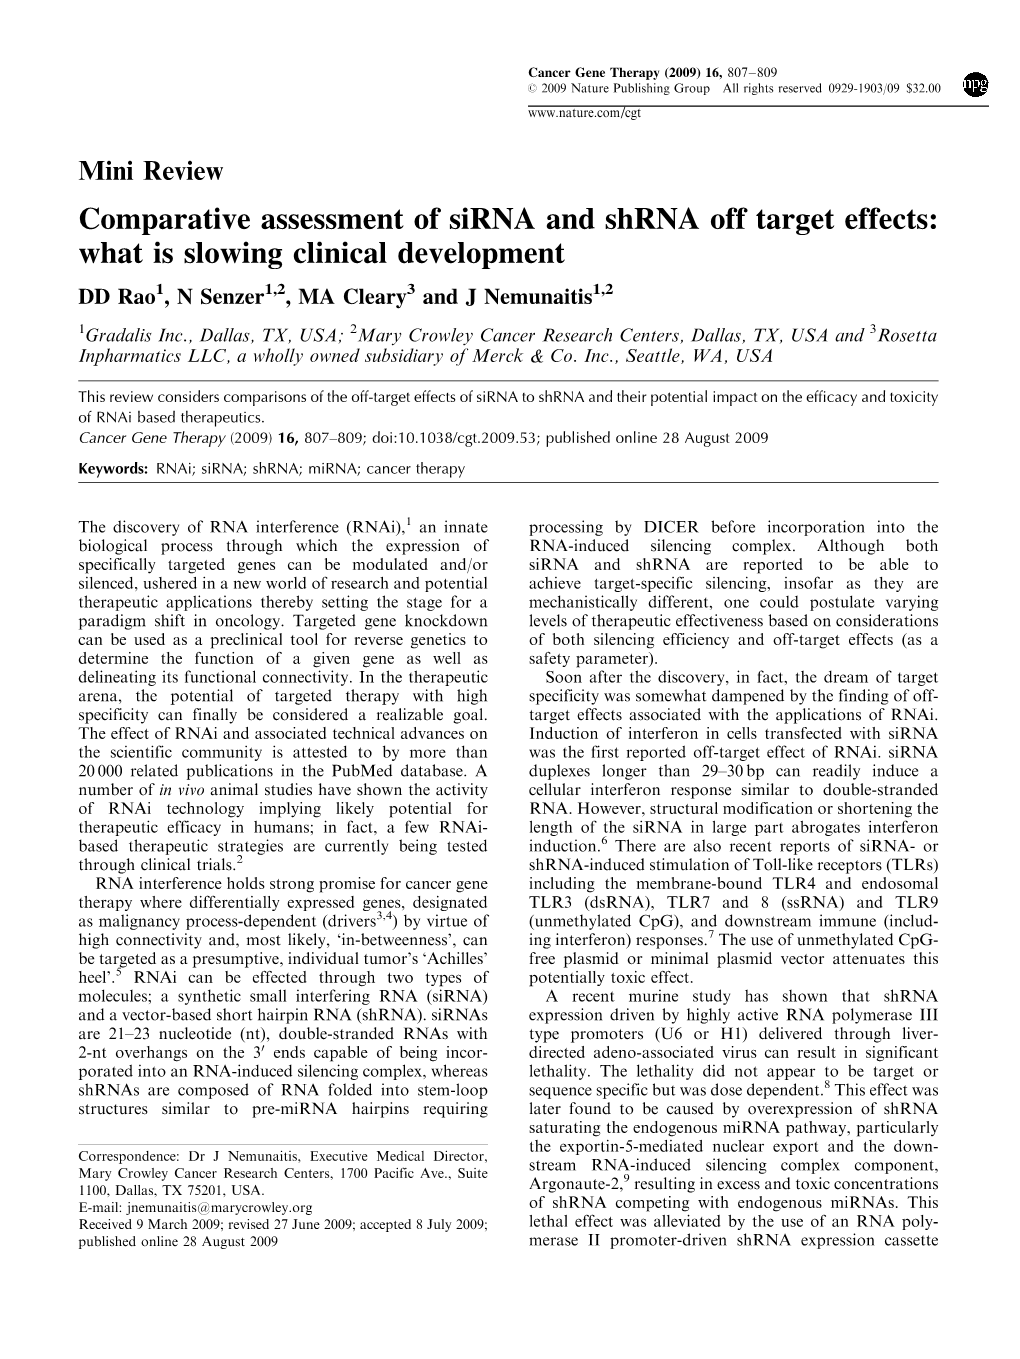 Comparative Assessment of Sirna and Shrna Off Target Effects